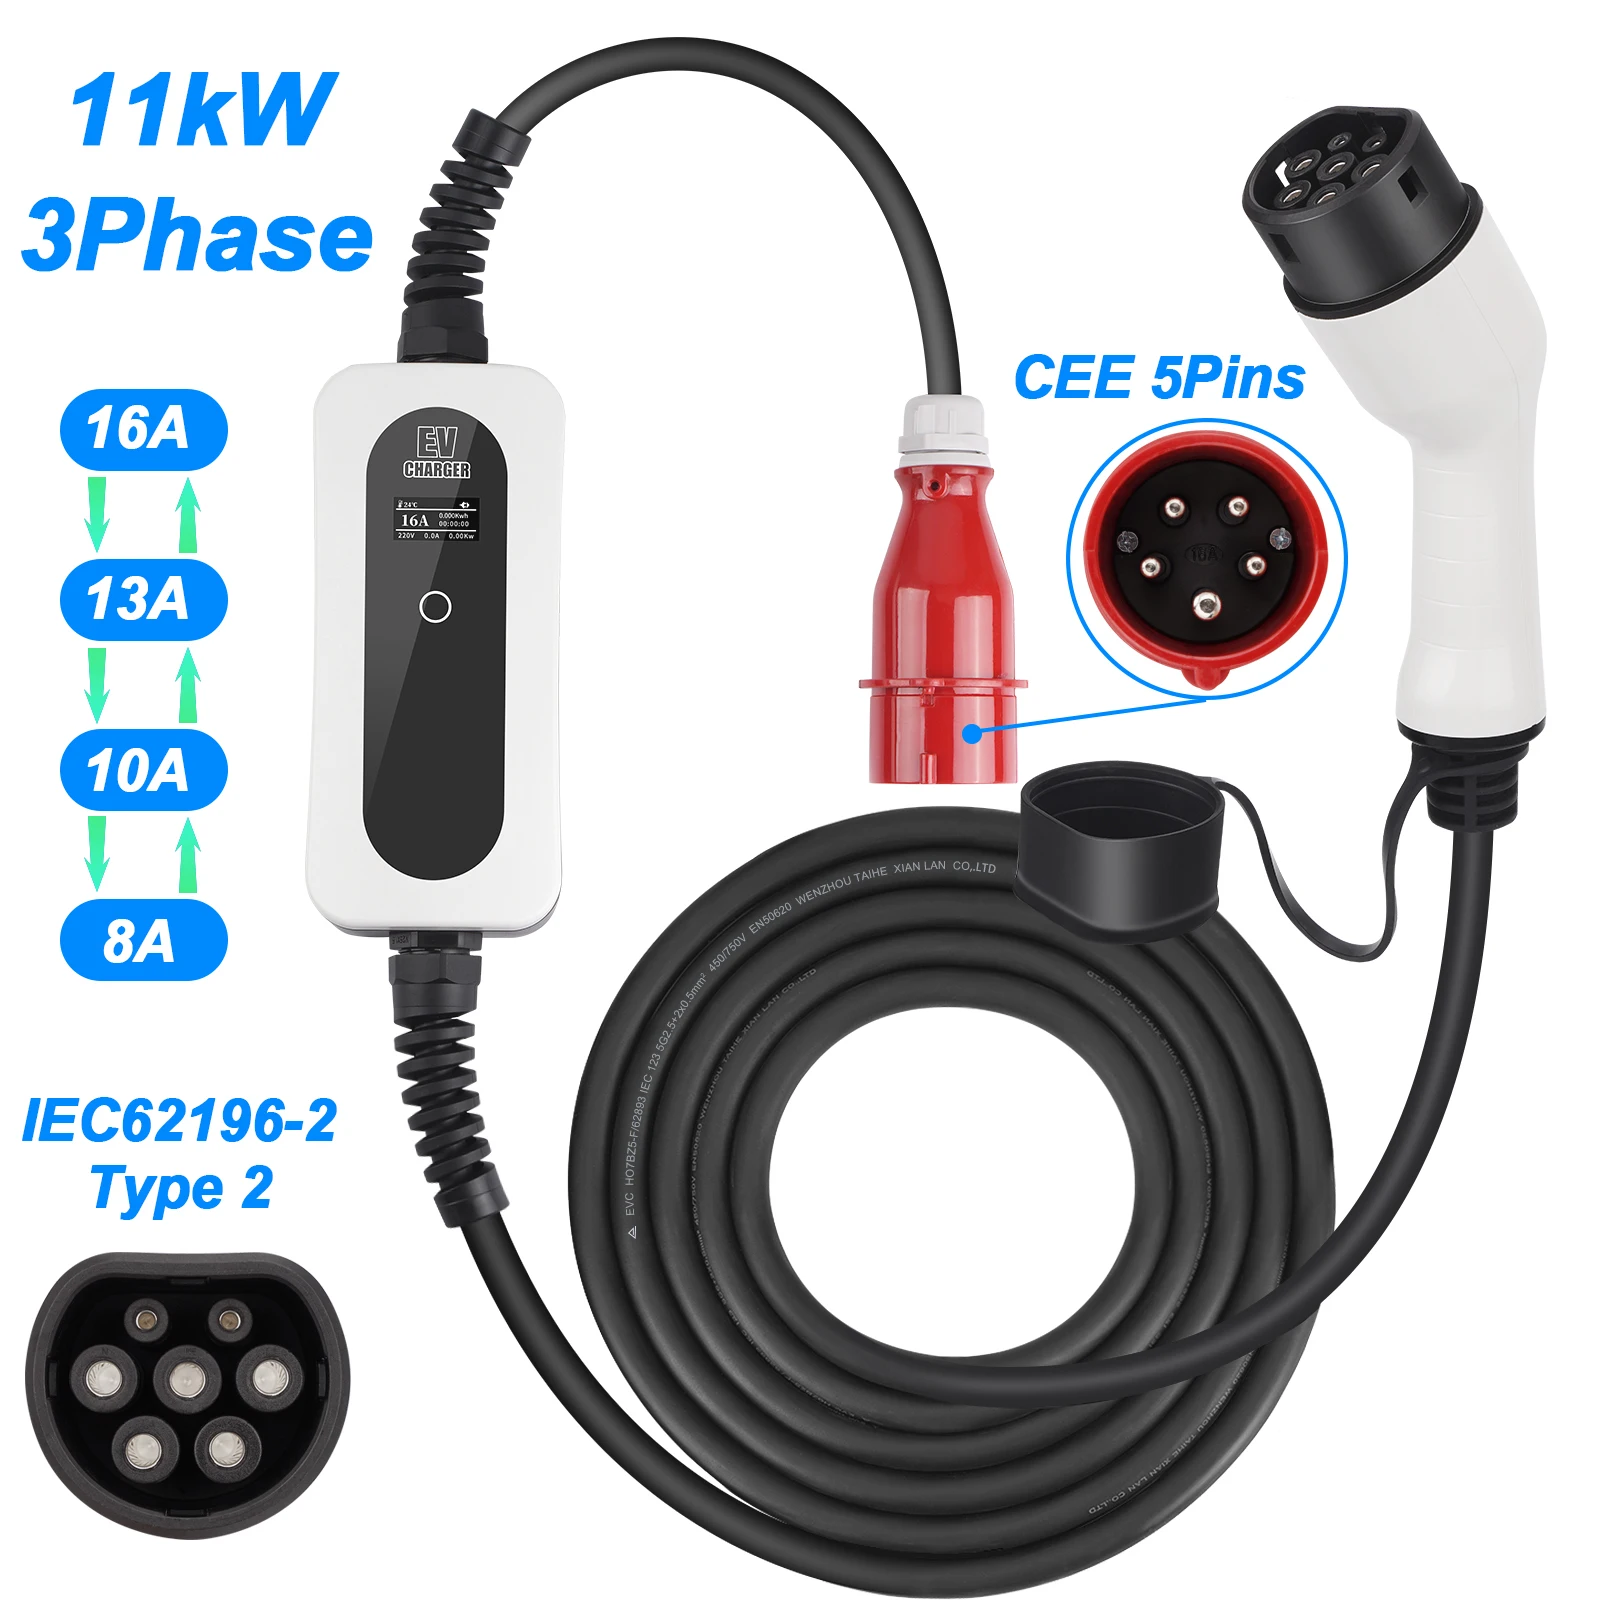 

11kw 3Phase 16A Adjustable Portable Evse Wallbox Ev Charger Type2 IEC62196 Electric Vehicle Cars Home Charging 5M CEE Red Plug